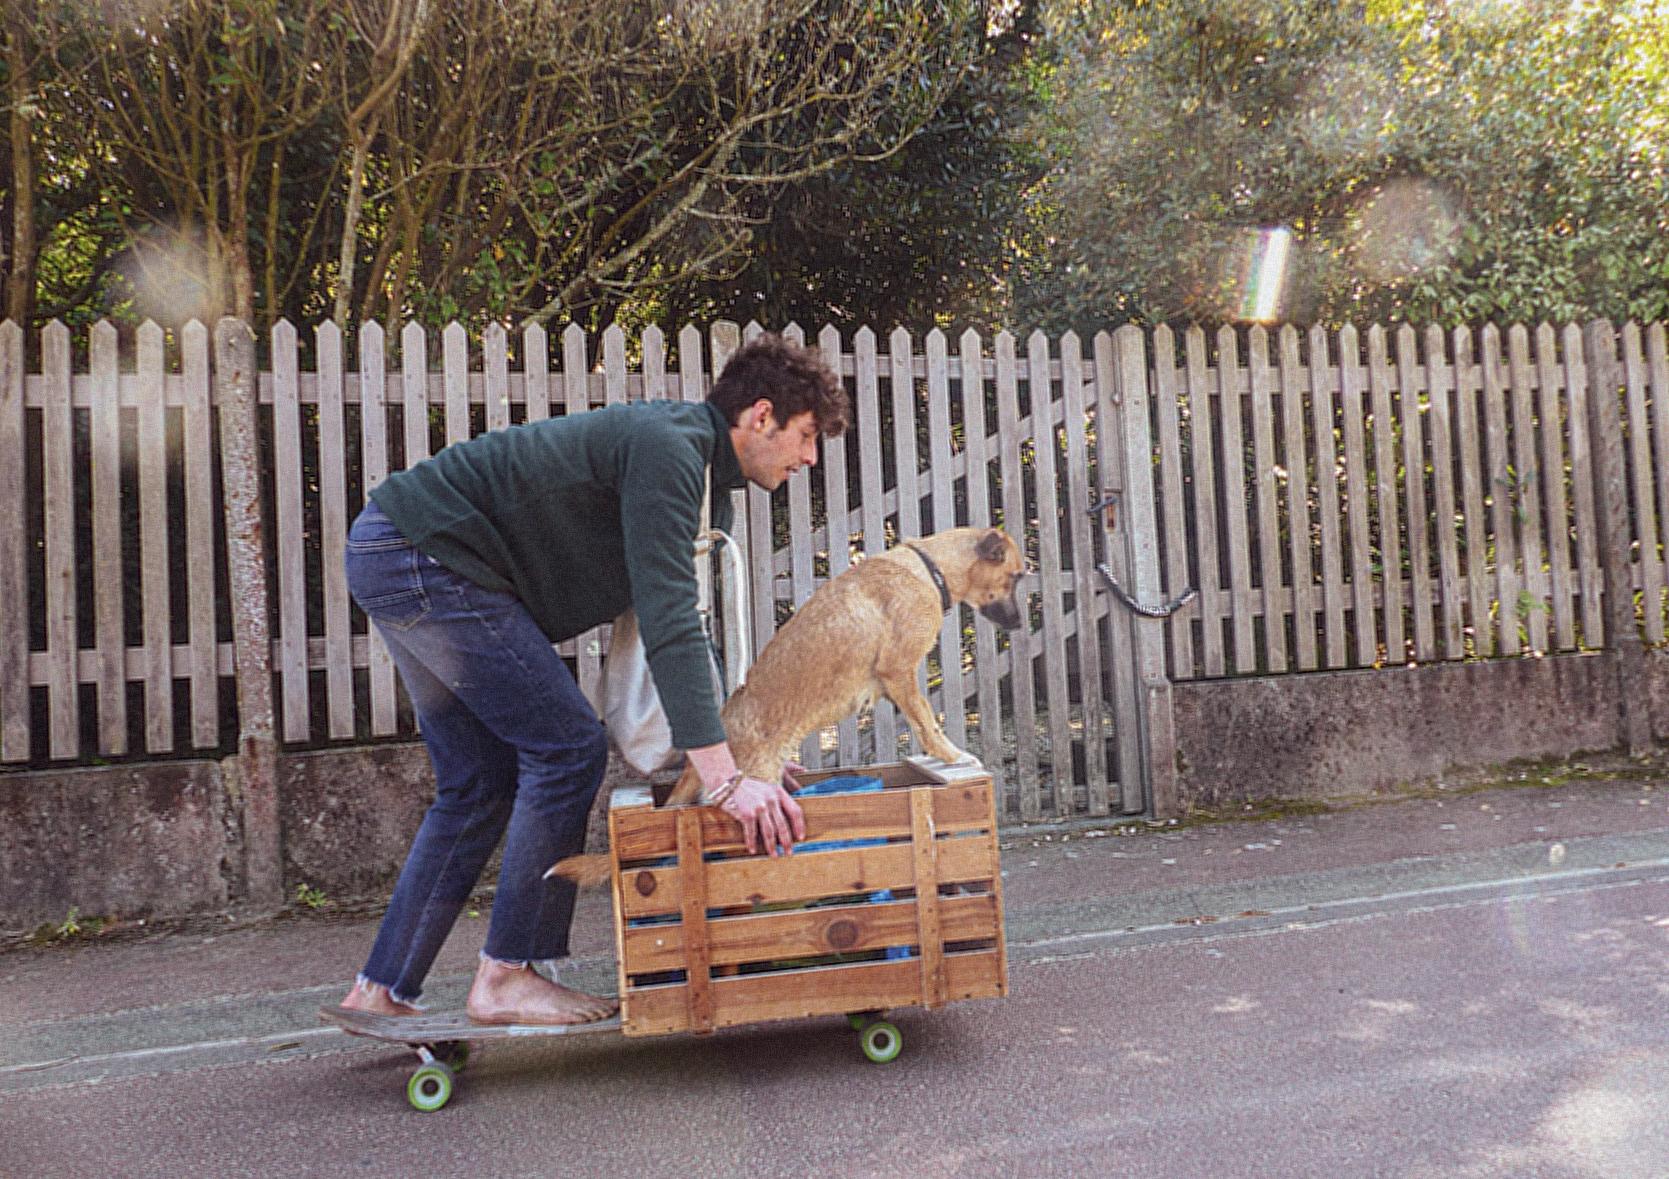 A Man Riding a Skateboard with His Dog on a Wooden Crate 